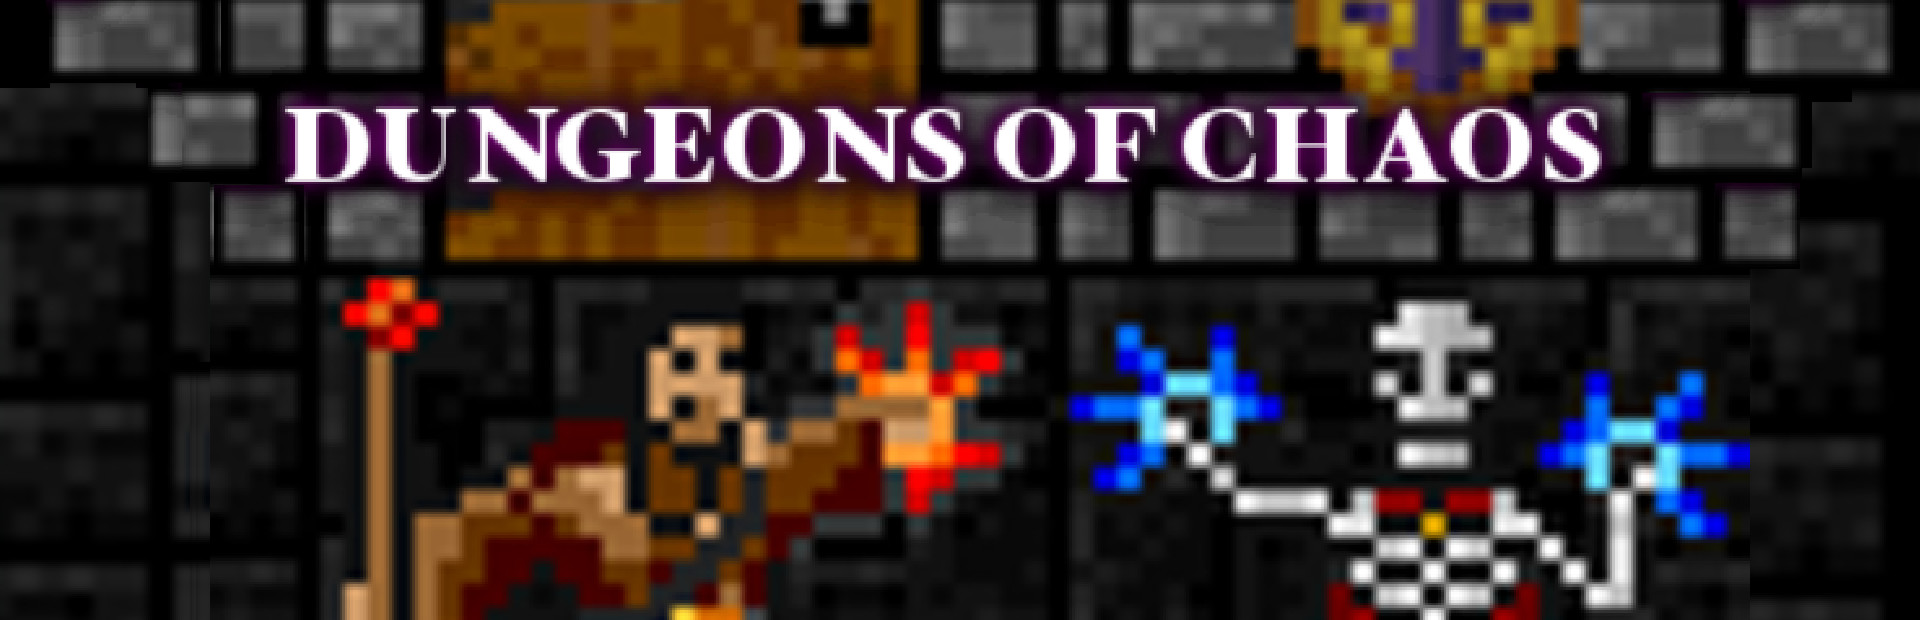 DUNGEONS OF CHAOS cover image